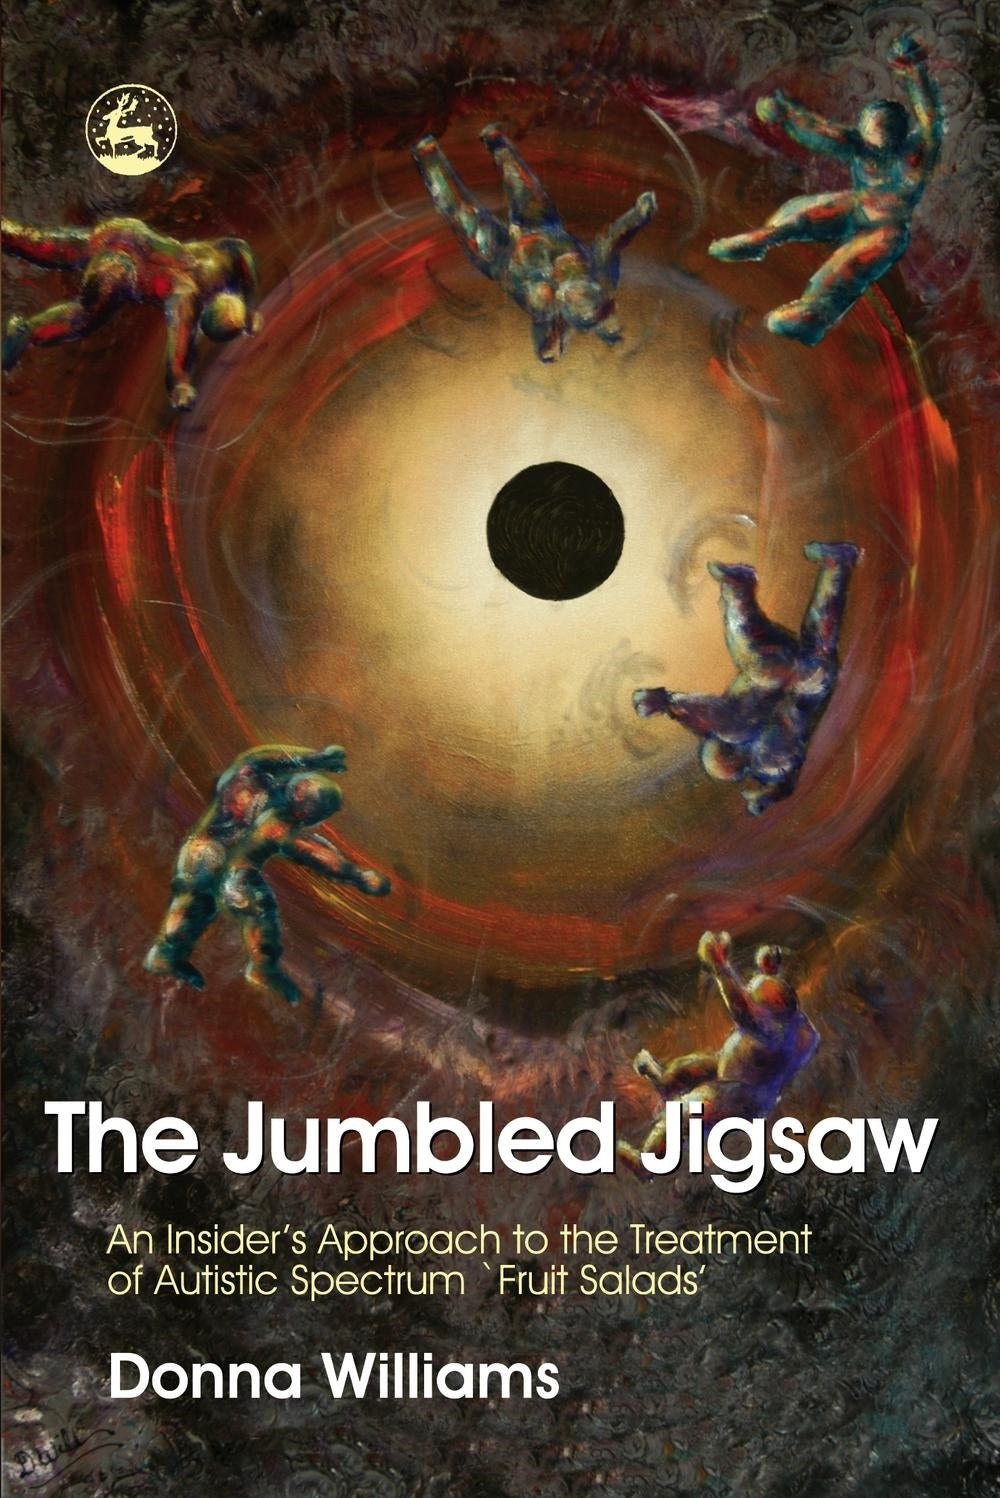 The Jumbled Jigsaw by Donna Williams